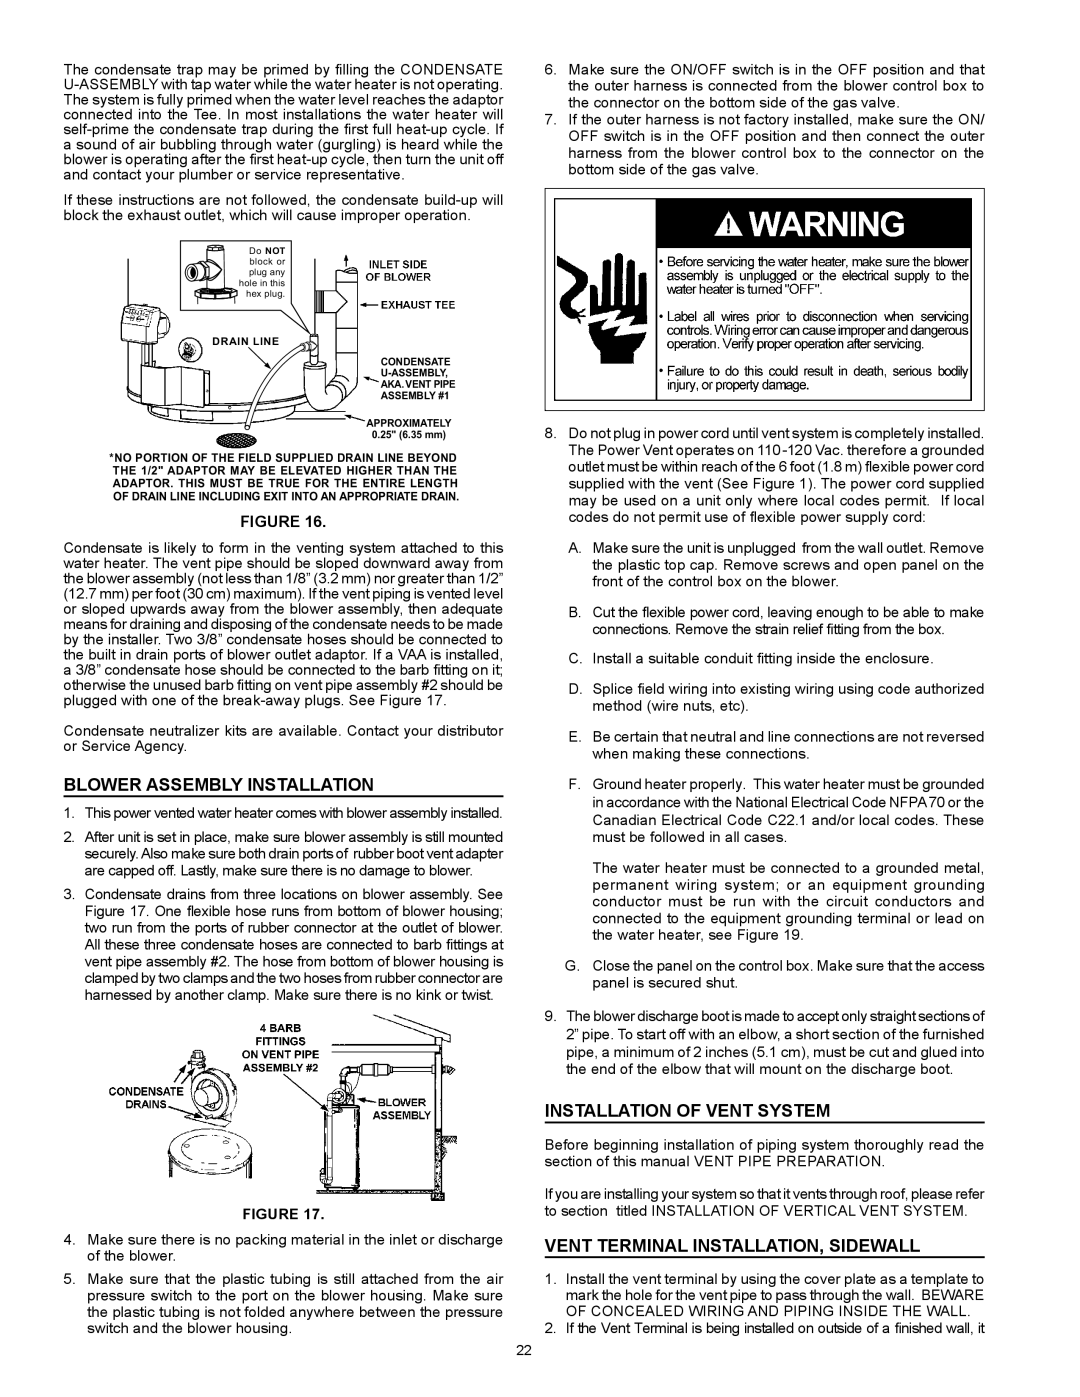 State Industries SHE 50 76N instruction manual Blower Assembly Installation, Installation of Vent System 